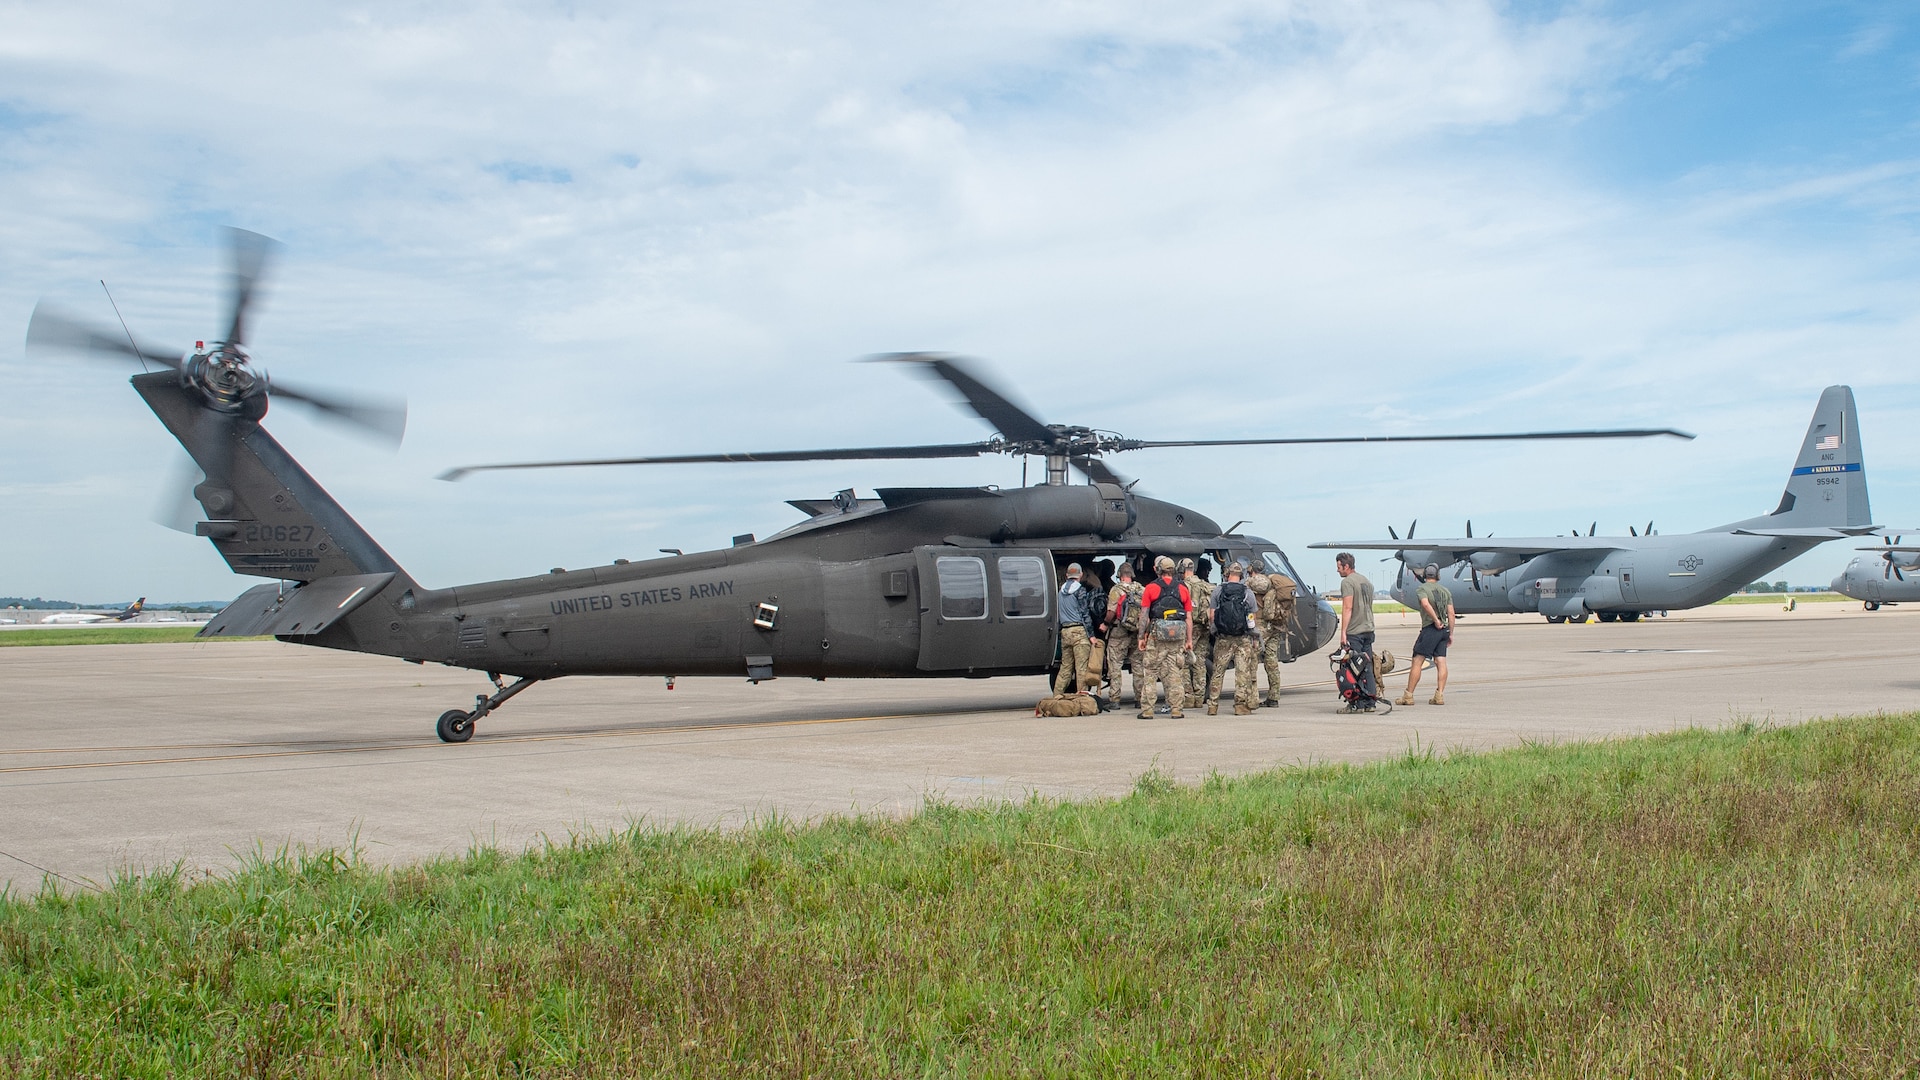 Airmen from the Kentucky Air National Guard’s 123rd Special Tactics Squadron load a UH-60 Black Hawk Helicopter with lifesaving equipment at the Kentucky Air National Guard Base in Louisville, Ky., July 30, 2022. In response to flooding in Eastern Kentucky, the unit coordinated 29 rotary-wing relief missions, rescued 19 people and two dogs, and recovered four bodies.